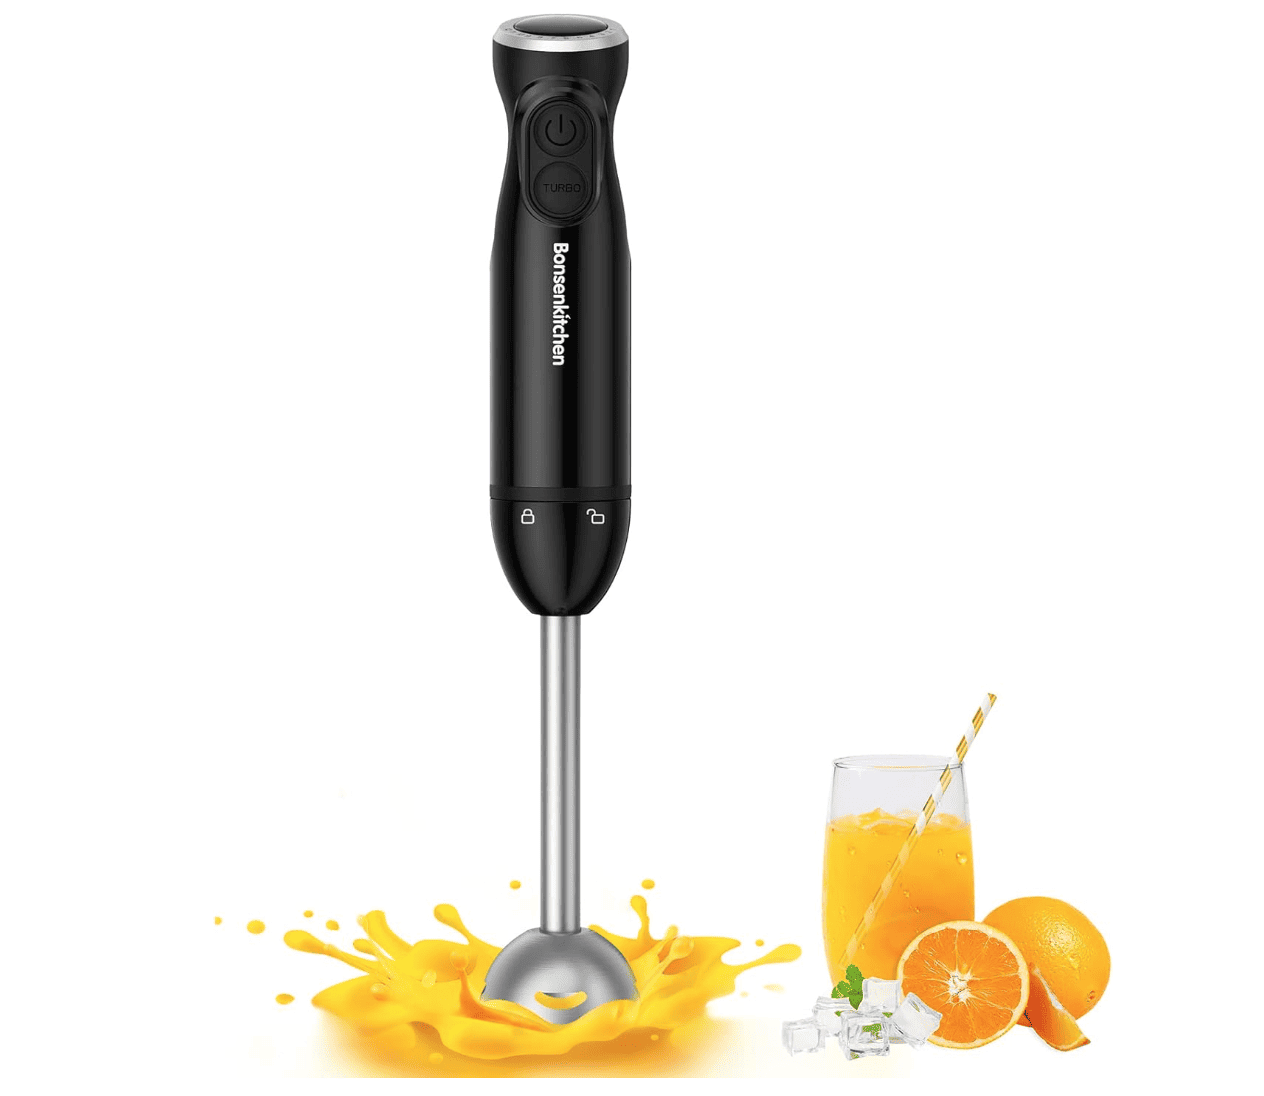 A hand blender on a white background.